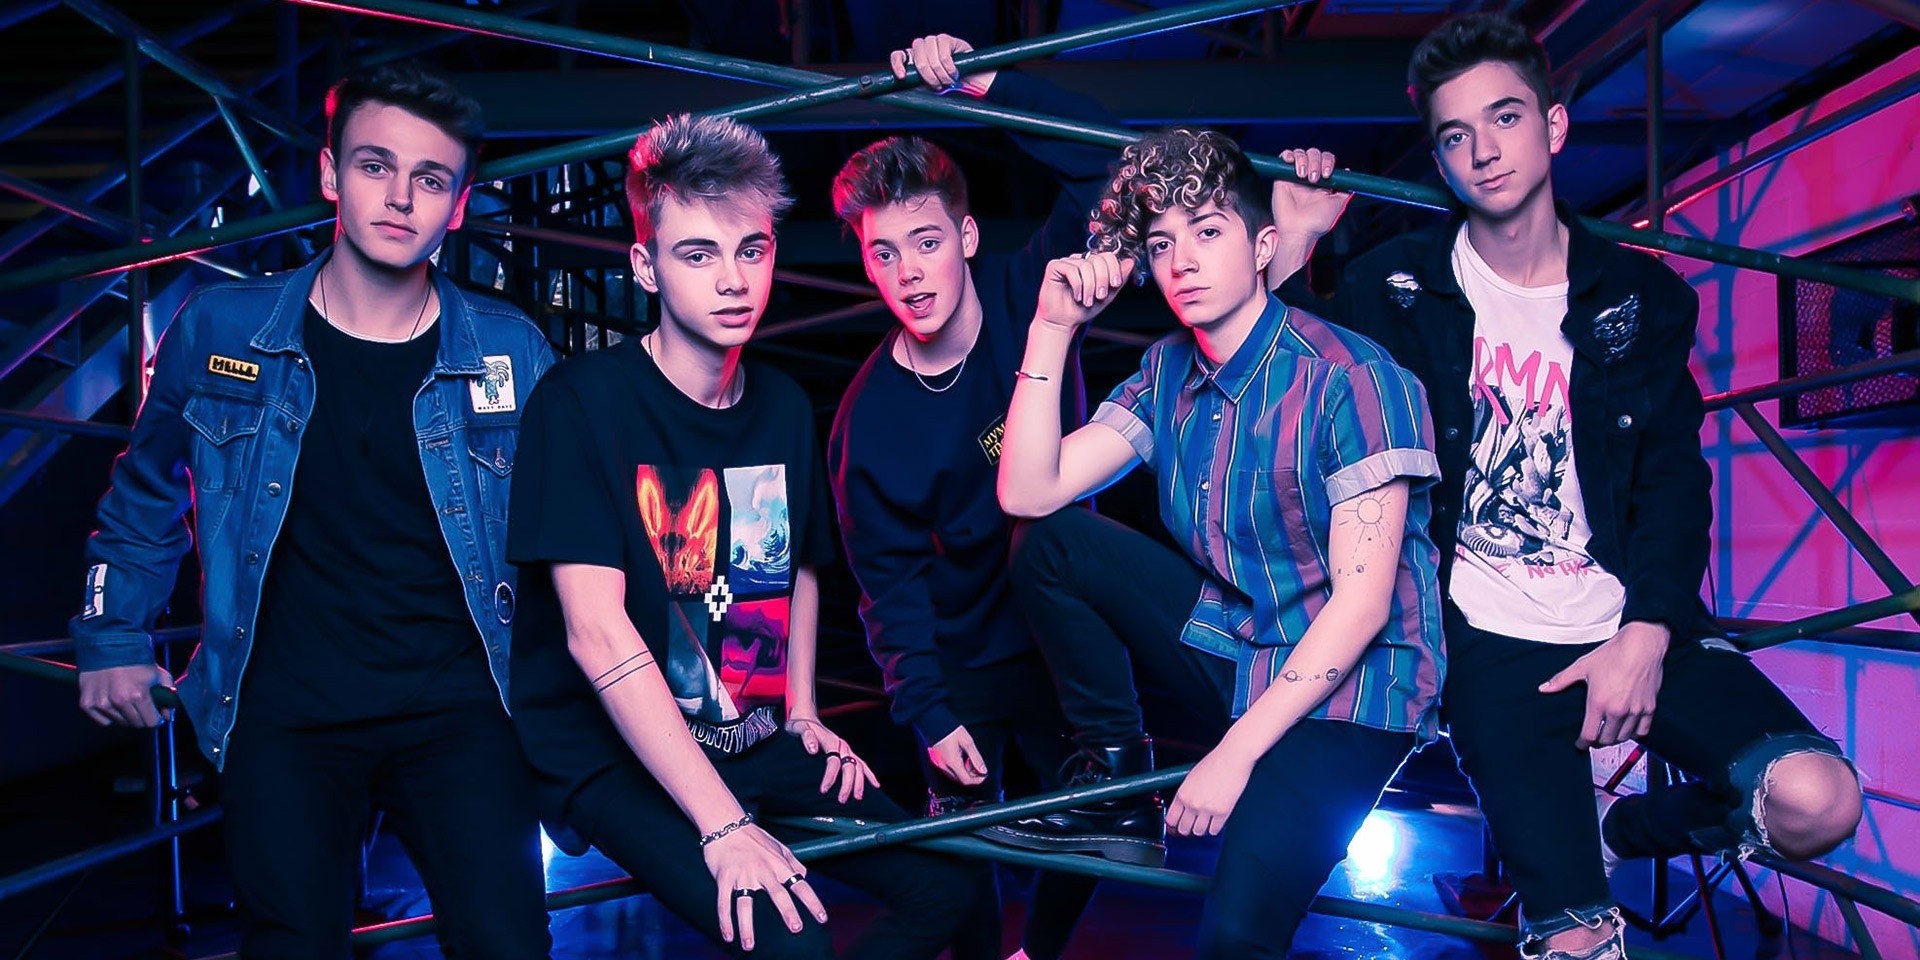 Why Don't We to make Manila debut in August